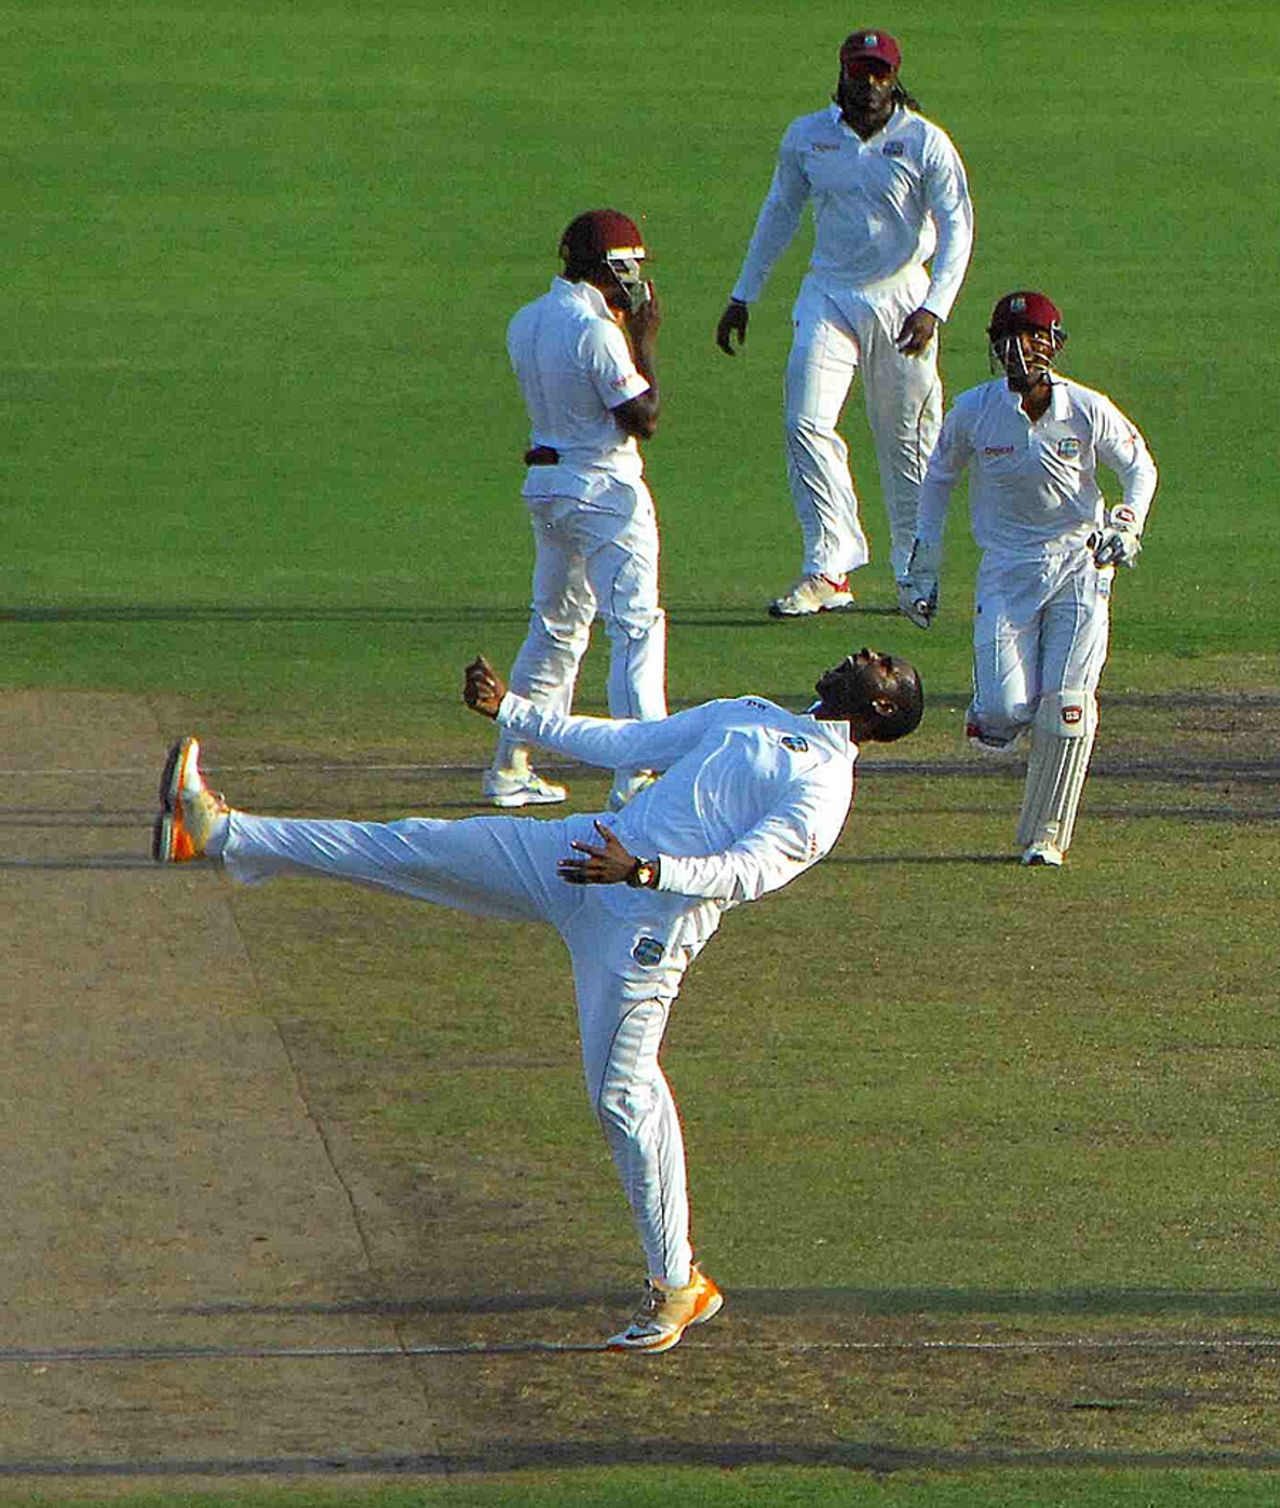 Shane Shillingford is over the moon after taking a wicket, West Indies v Zimbabwe, 1st Test, Barbados, 2nd day, March 13, 2013